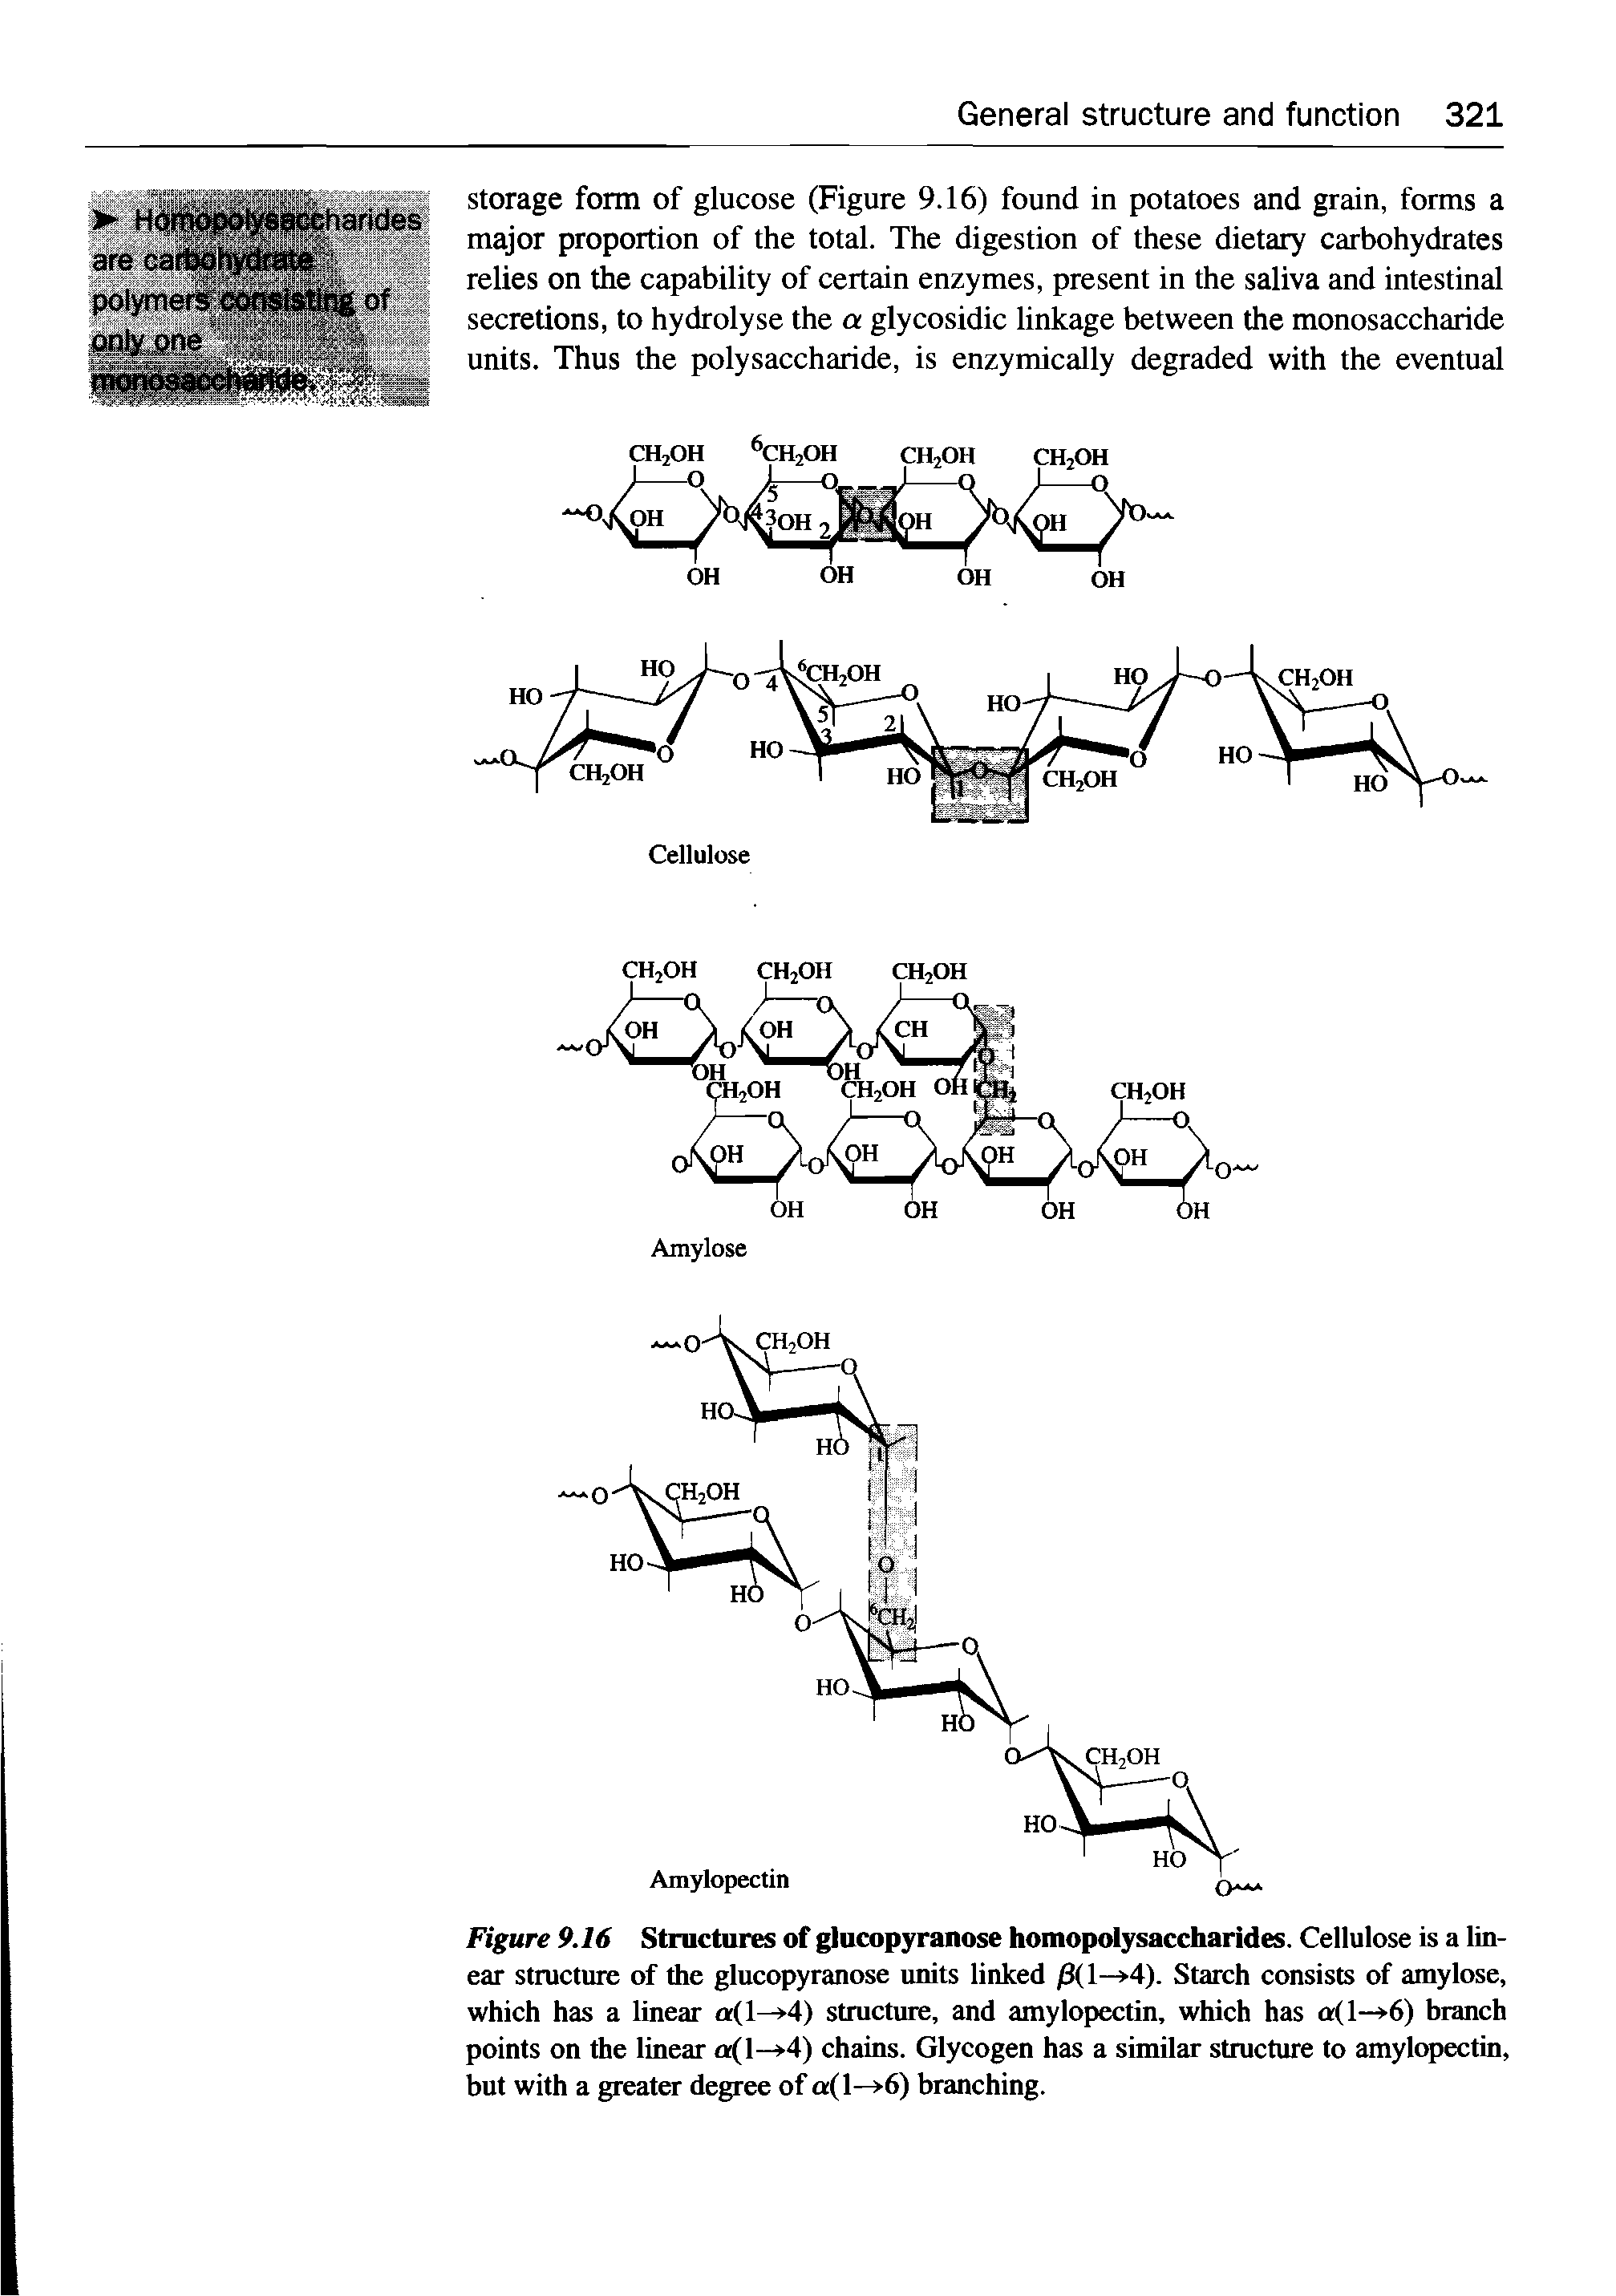 Figure 9.16 Structures of glucopyranose homopolysaccharides. Cellulose is a linear structure of the glucopyranose units linked /3( 1 —>4). Starch consists of amylose, which has a linear < (1—>4) structure, and amylopectin, which has a(l—>6) branch points on the linear a(l—>4) chains. Glycogen has a similar structure to amylopectin, but with a greater degree of < ( 1—>6) branching.